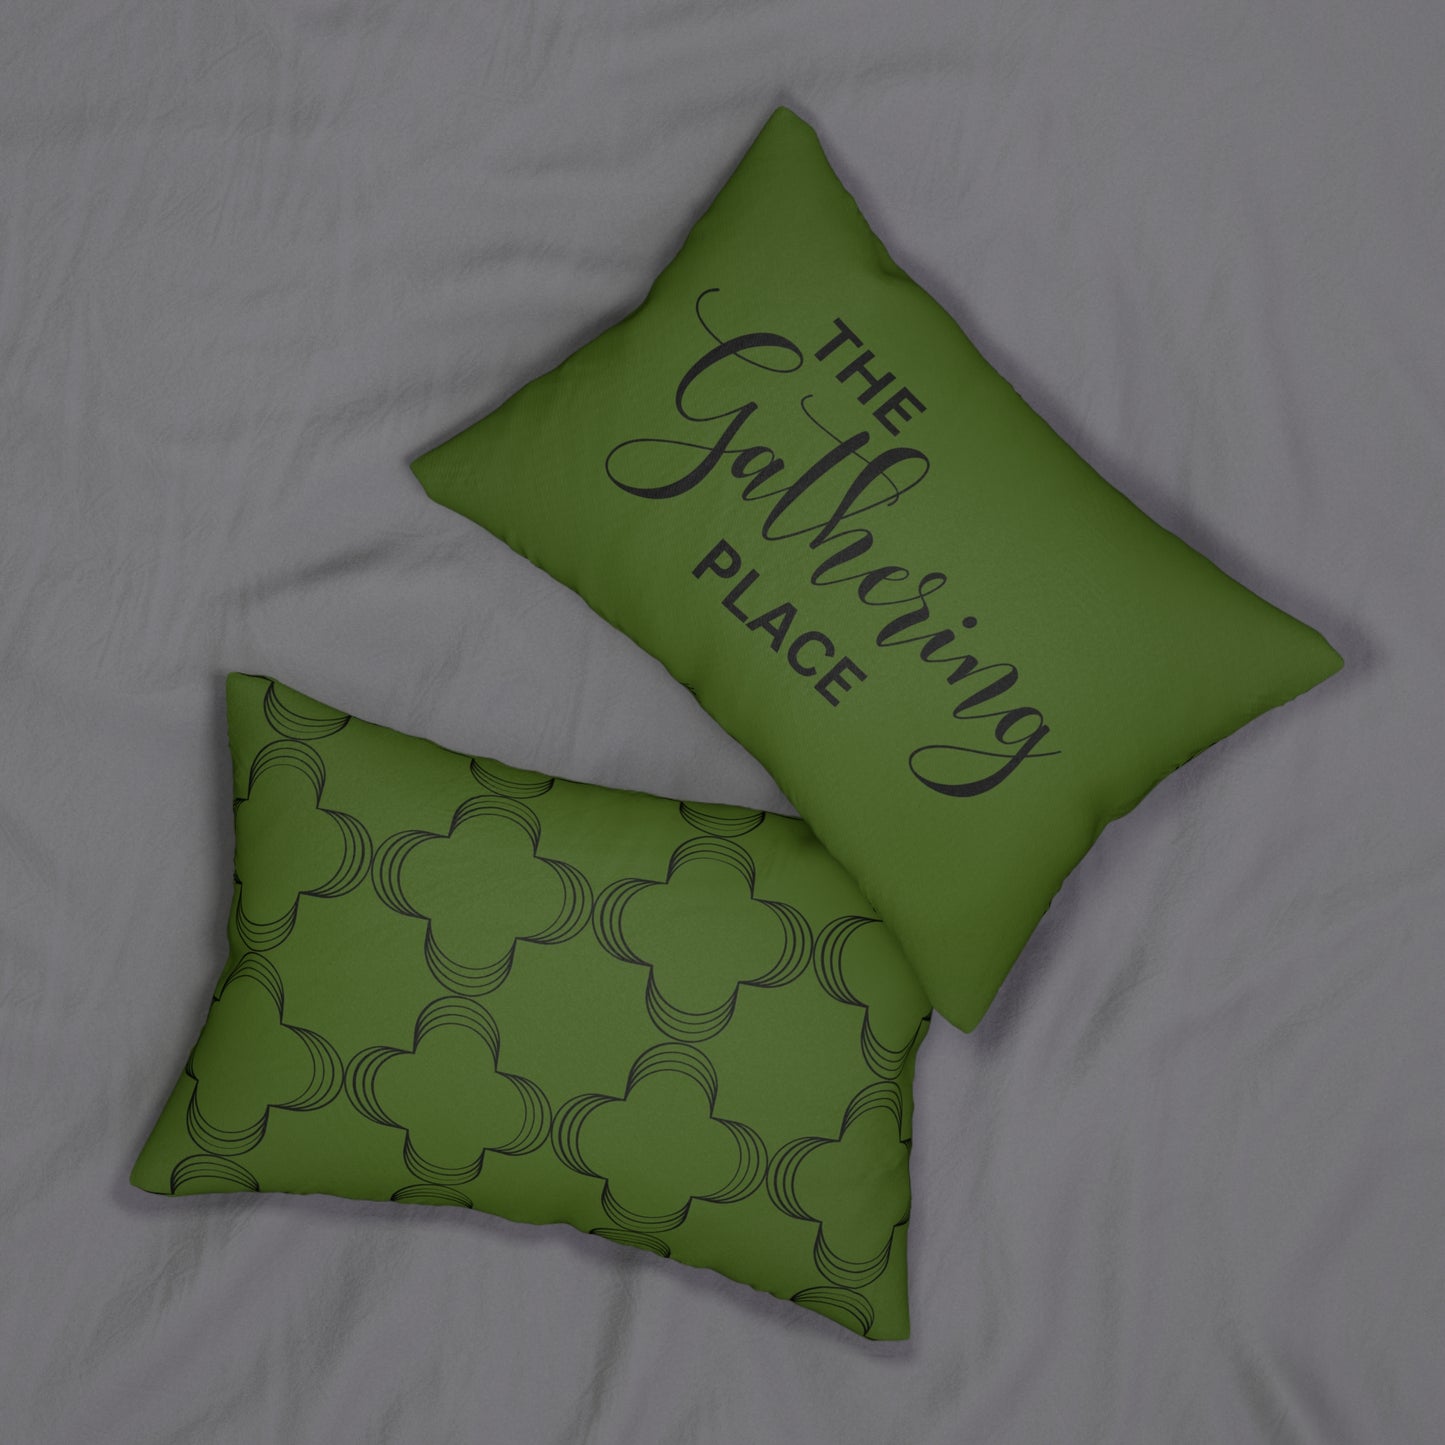 "The Gathering Place" Geometric Accent Pillow